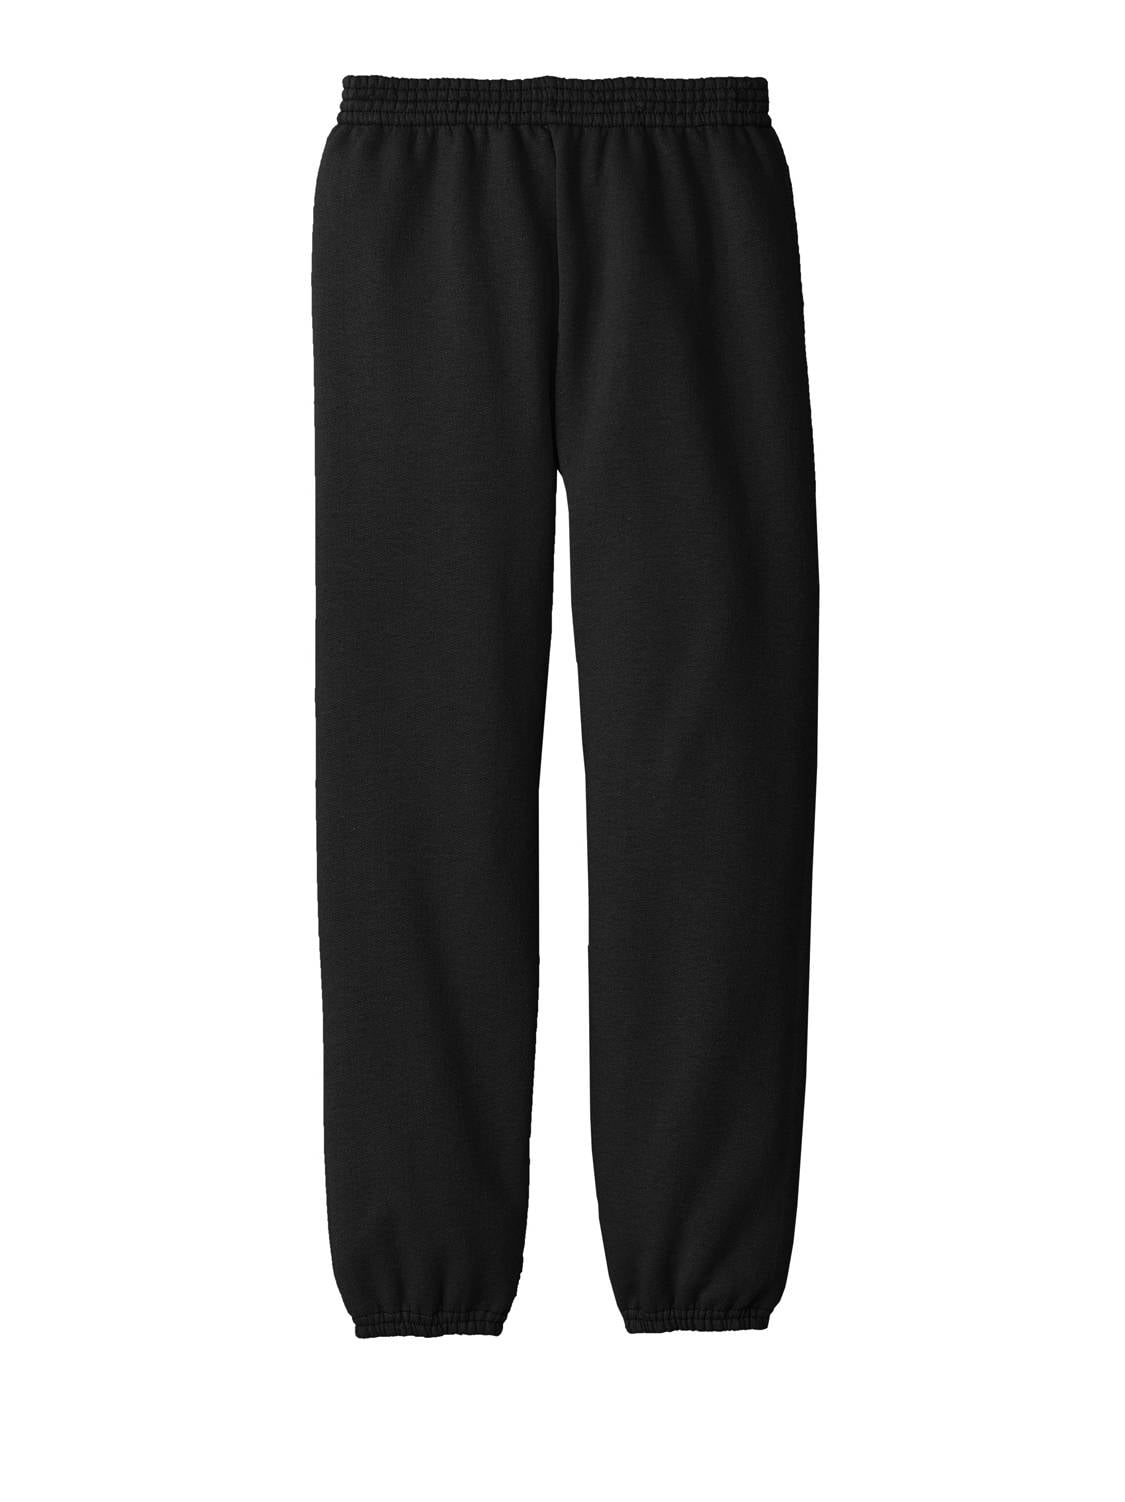 Gravity Threads Youth Core Fleece Sweatpant - White - Small 